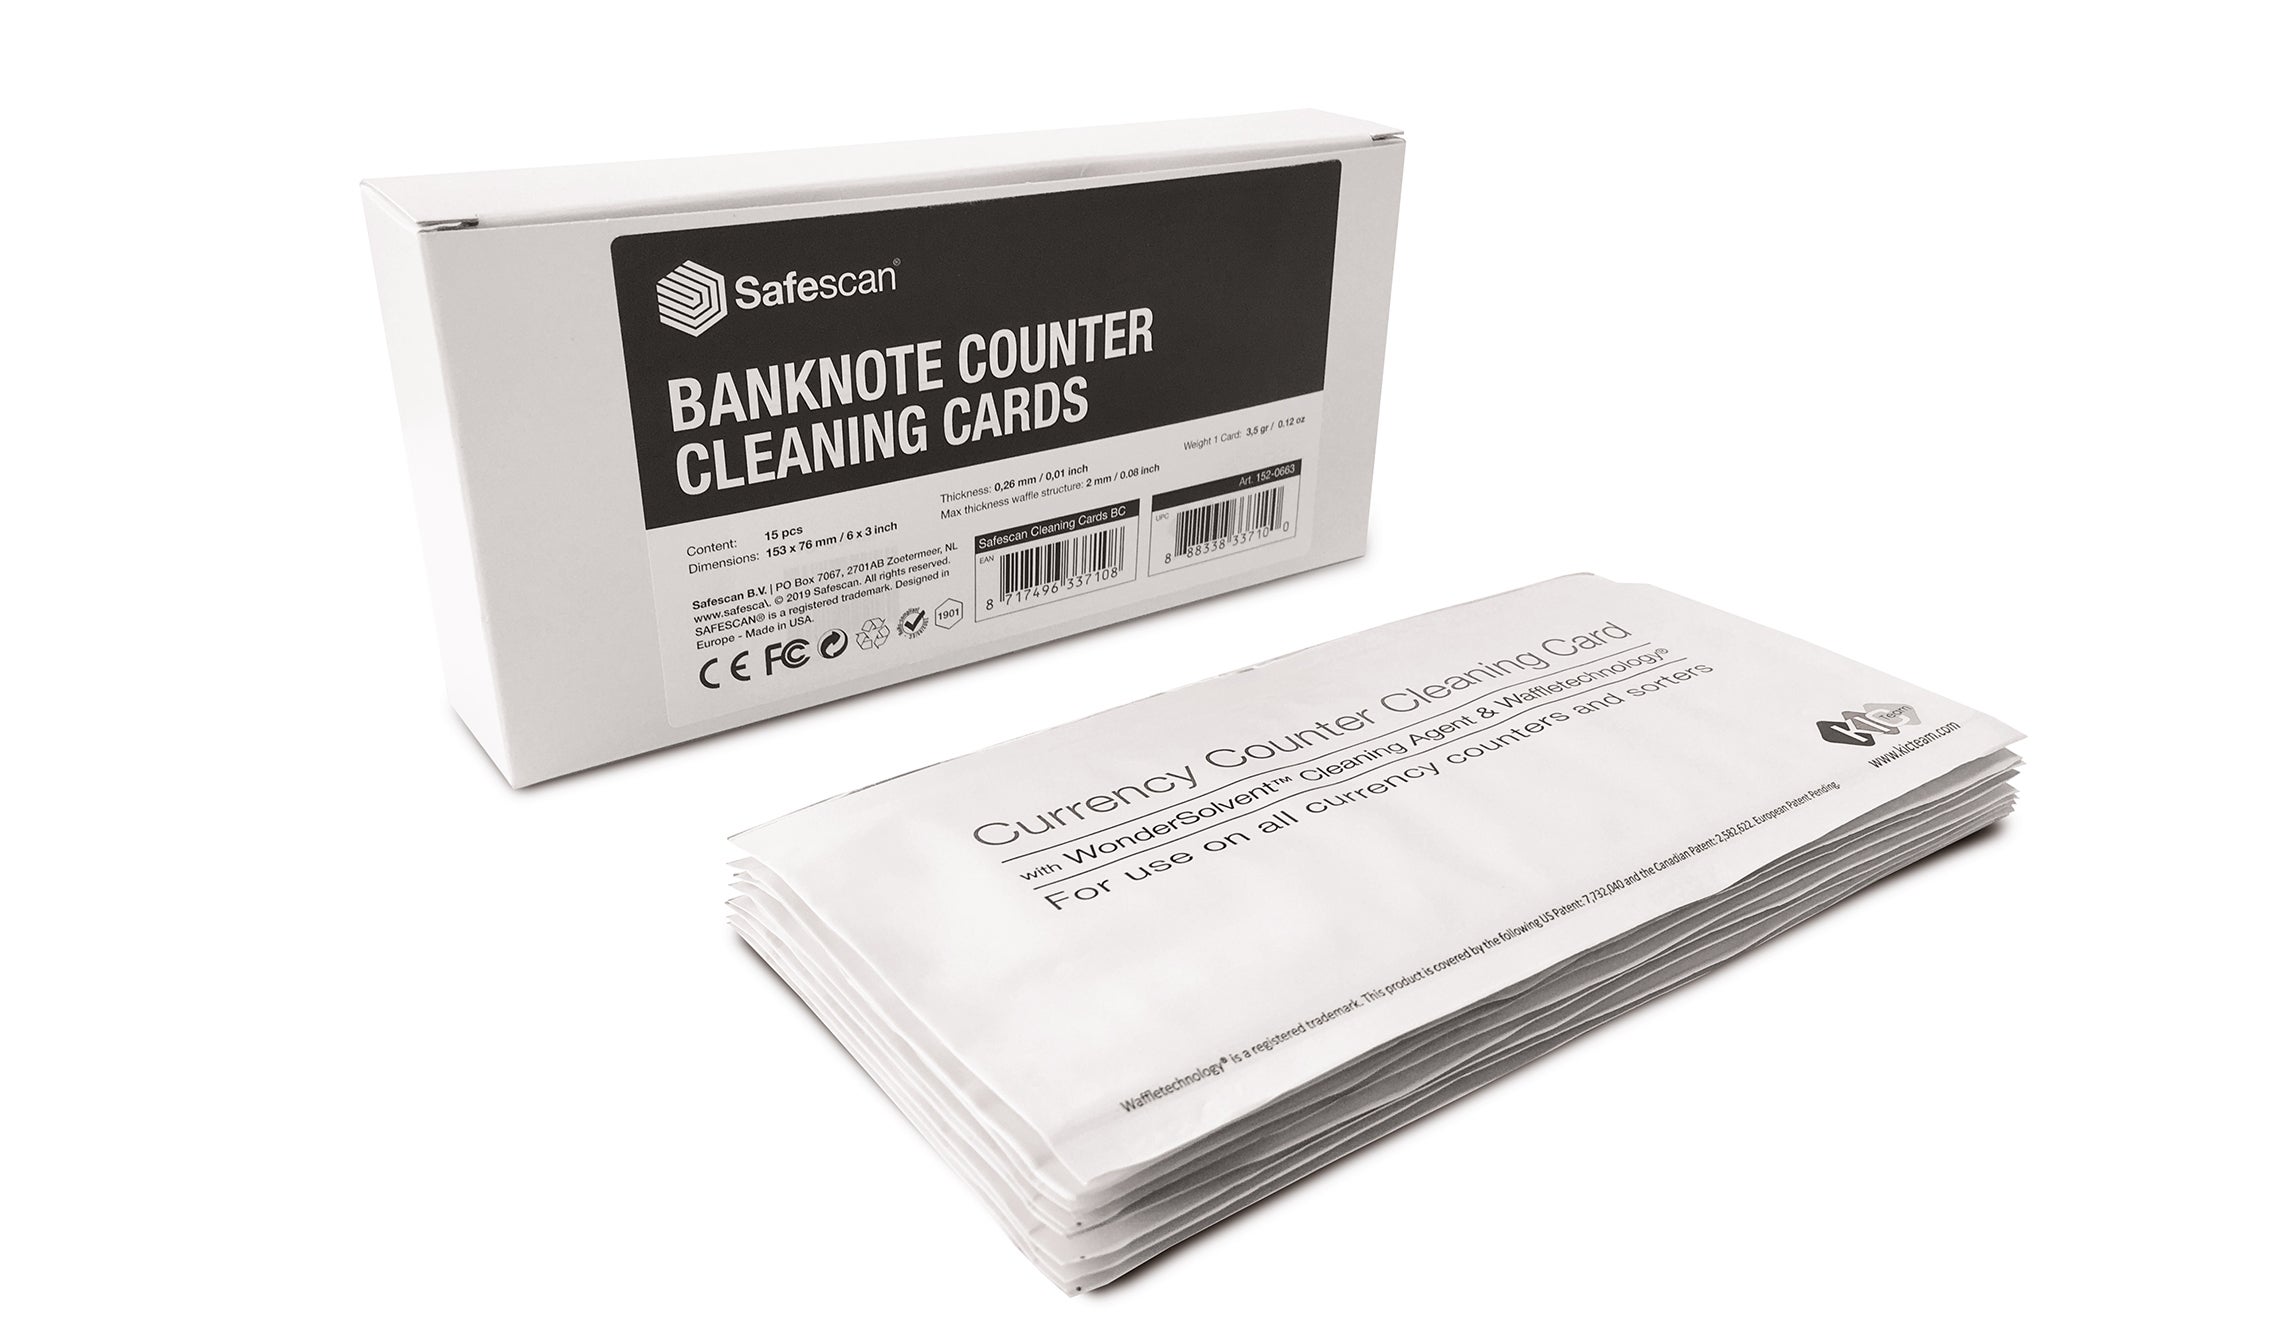 safescan-cleaning-cards-for-banknote-counters